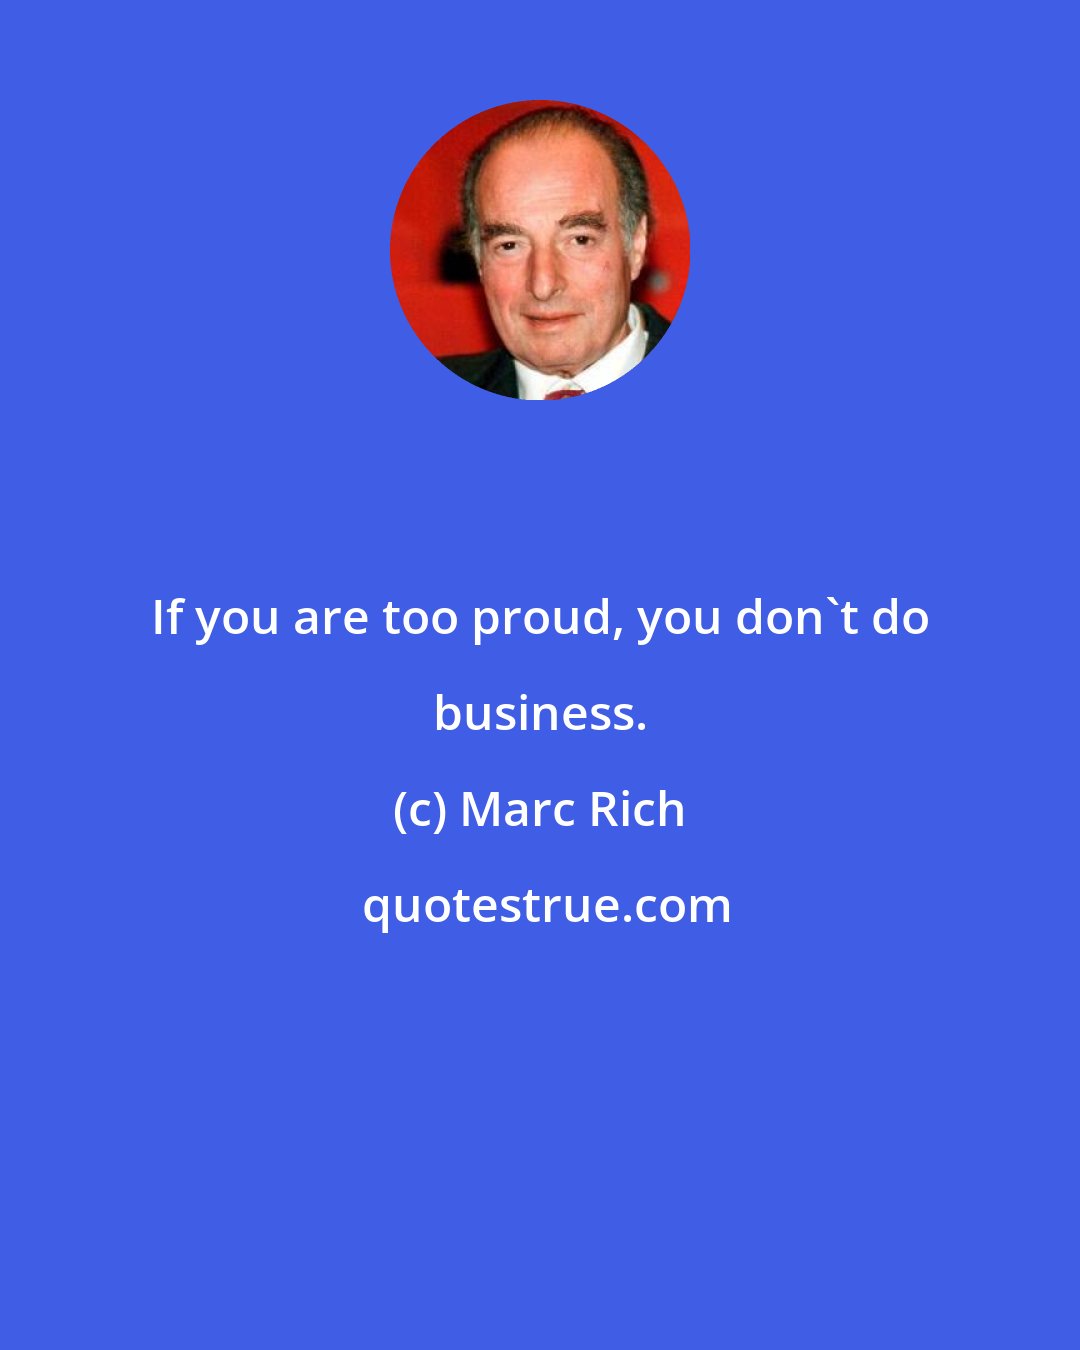 Marc Rich: If you are too proud, you don't do business.